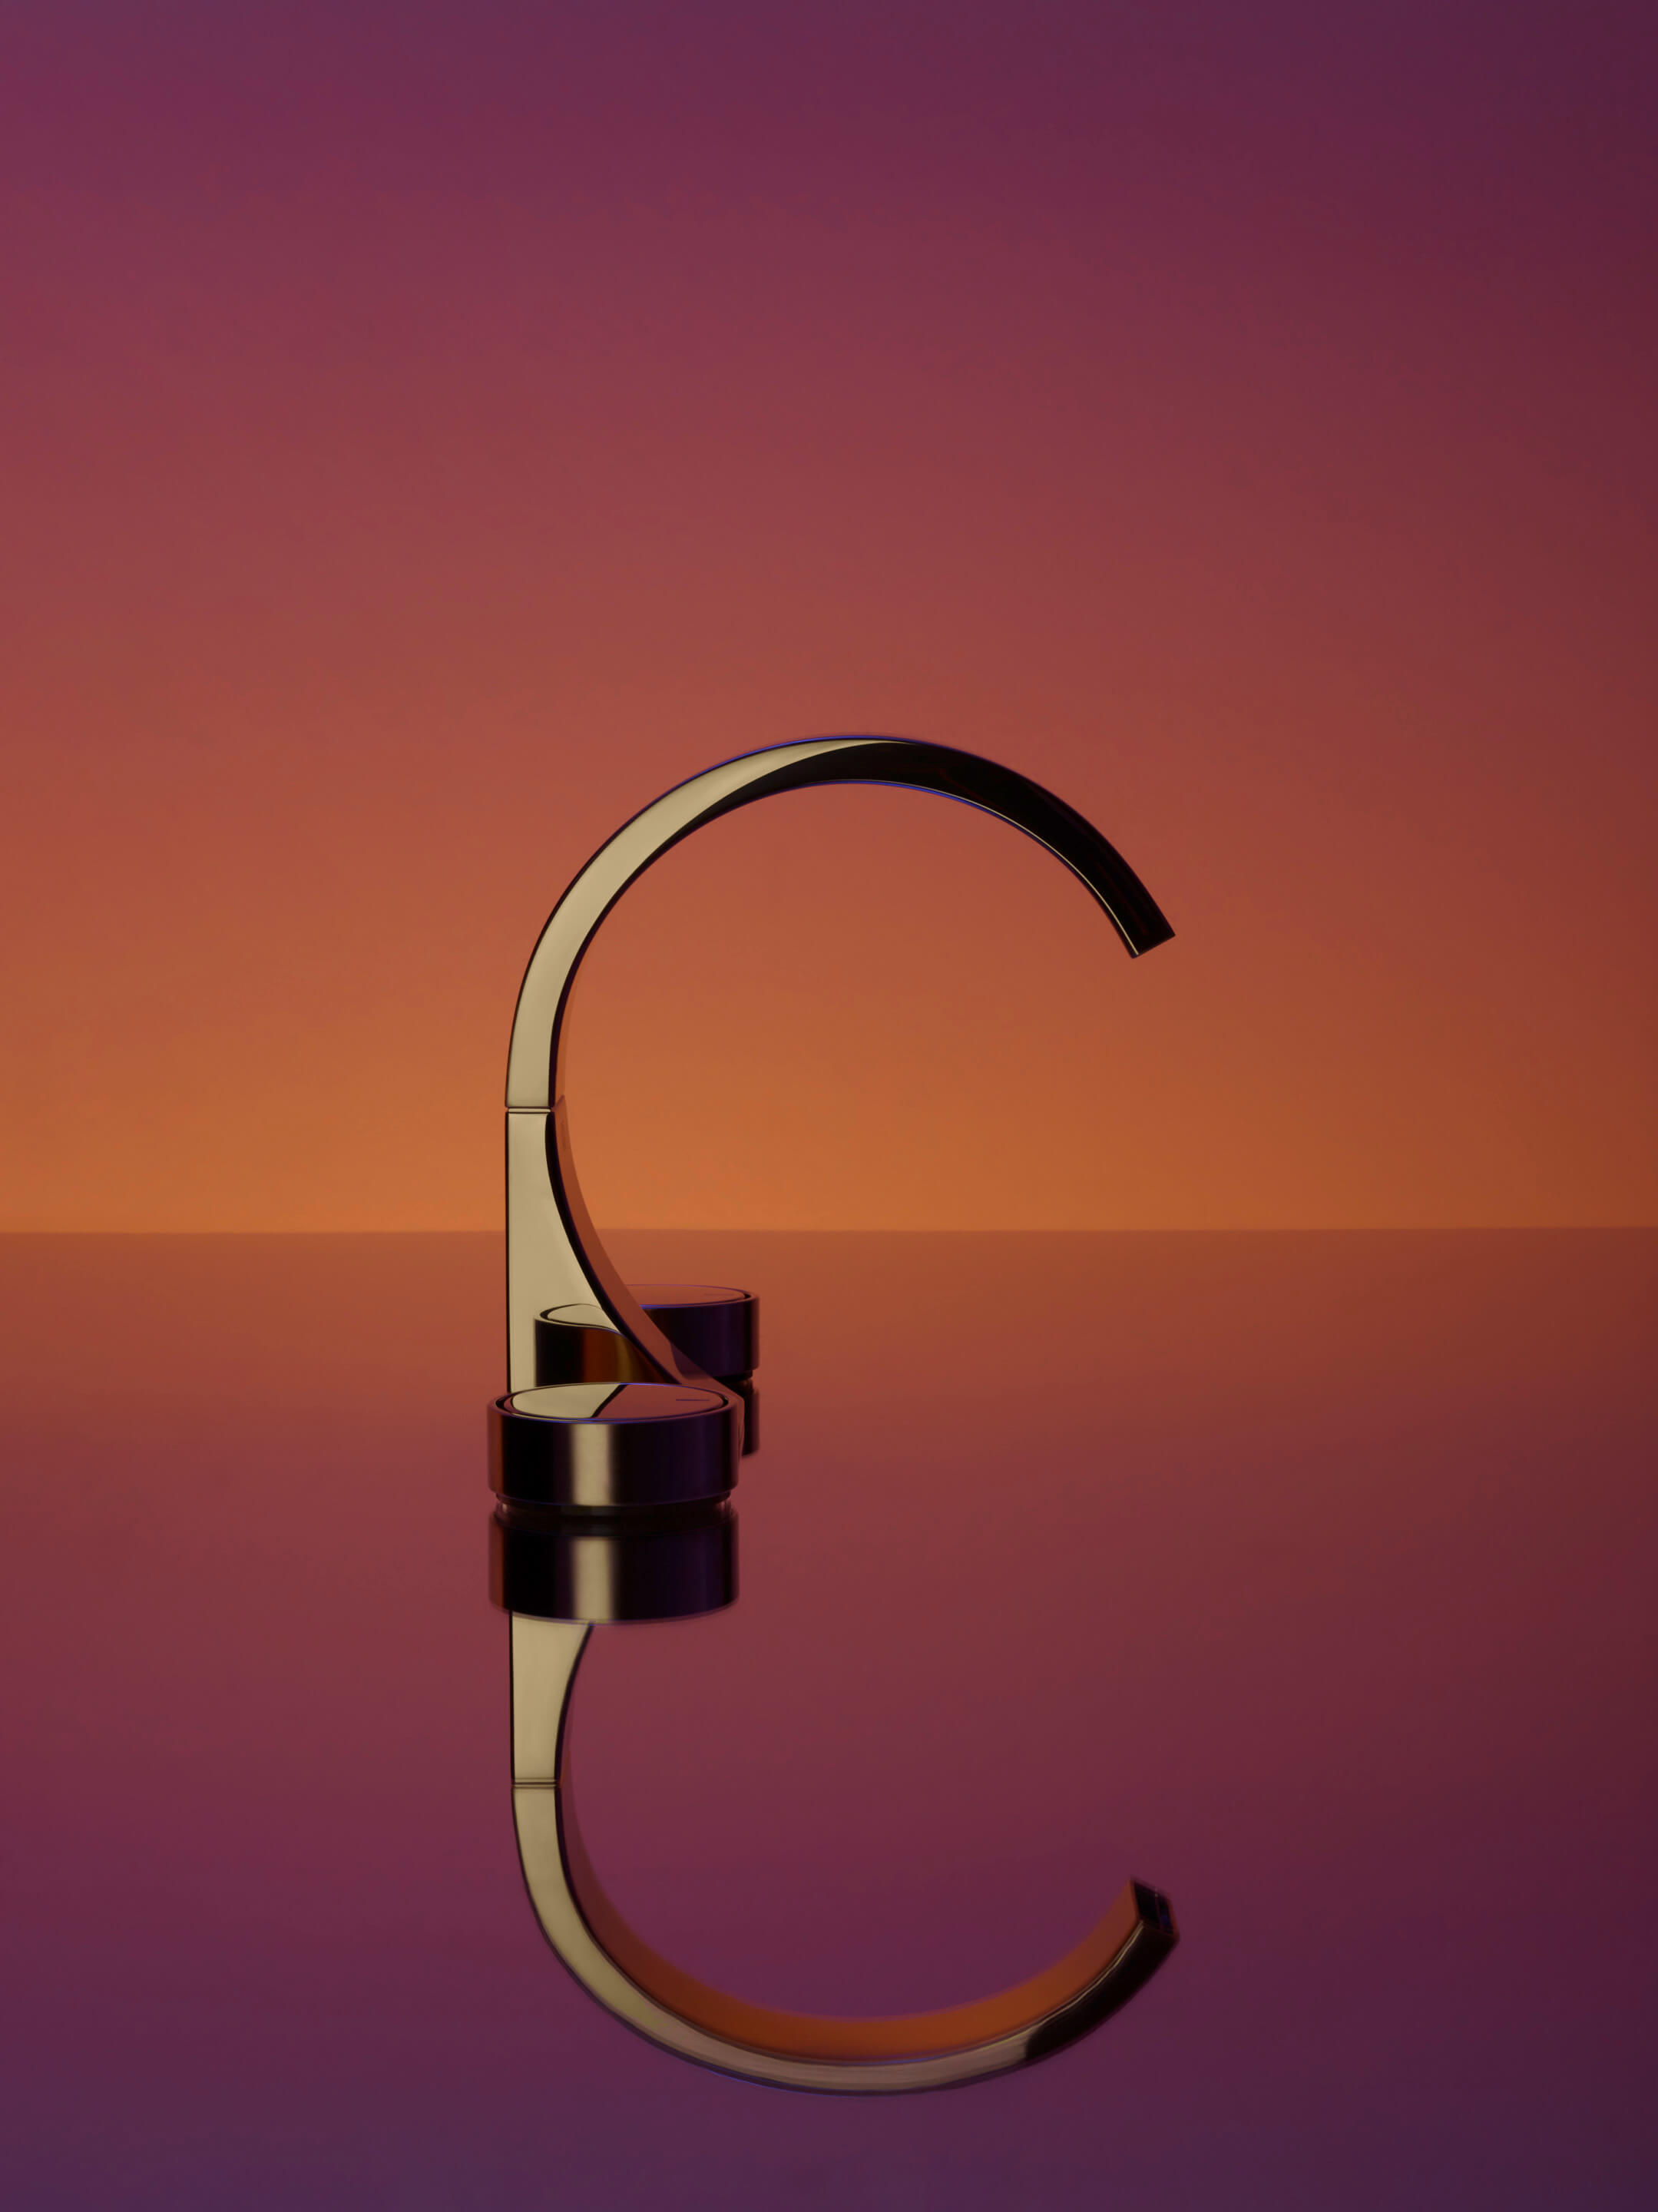 a curved gold faucet in front of an ombre background that fades from purple to orange